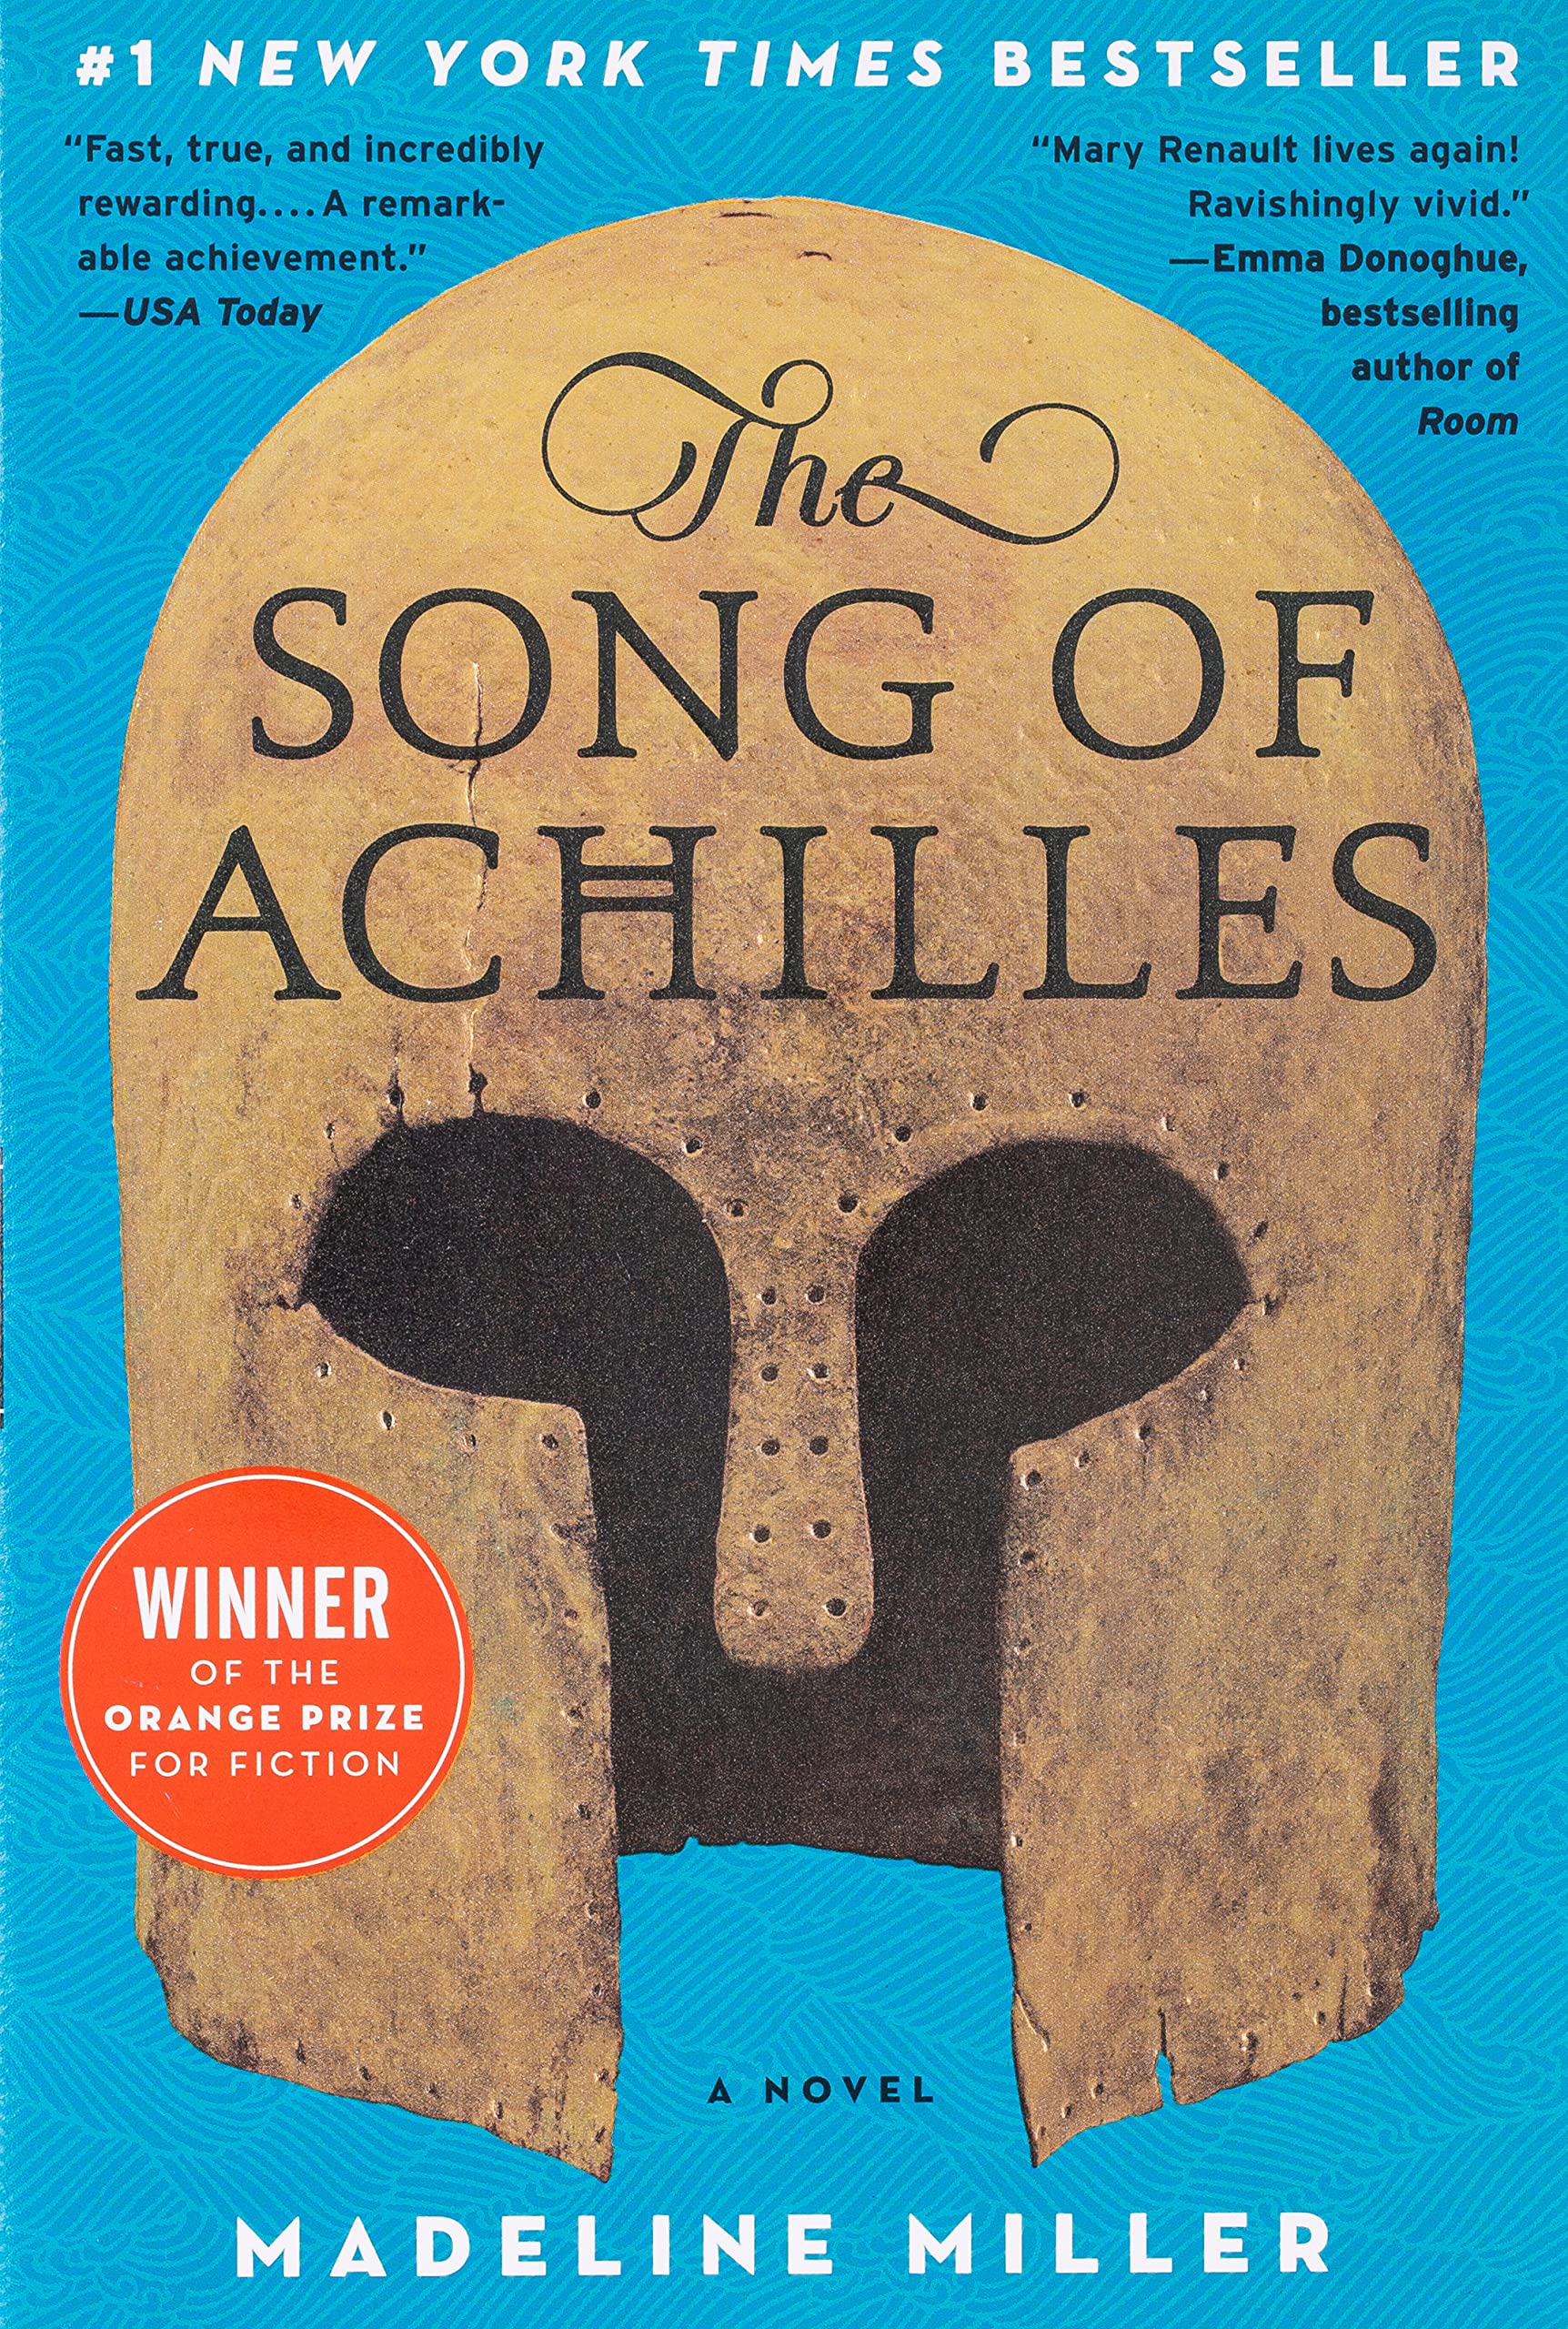 song of achilles cover